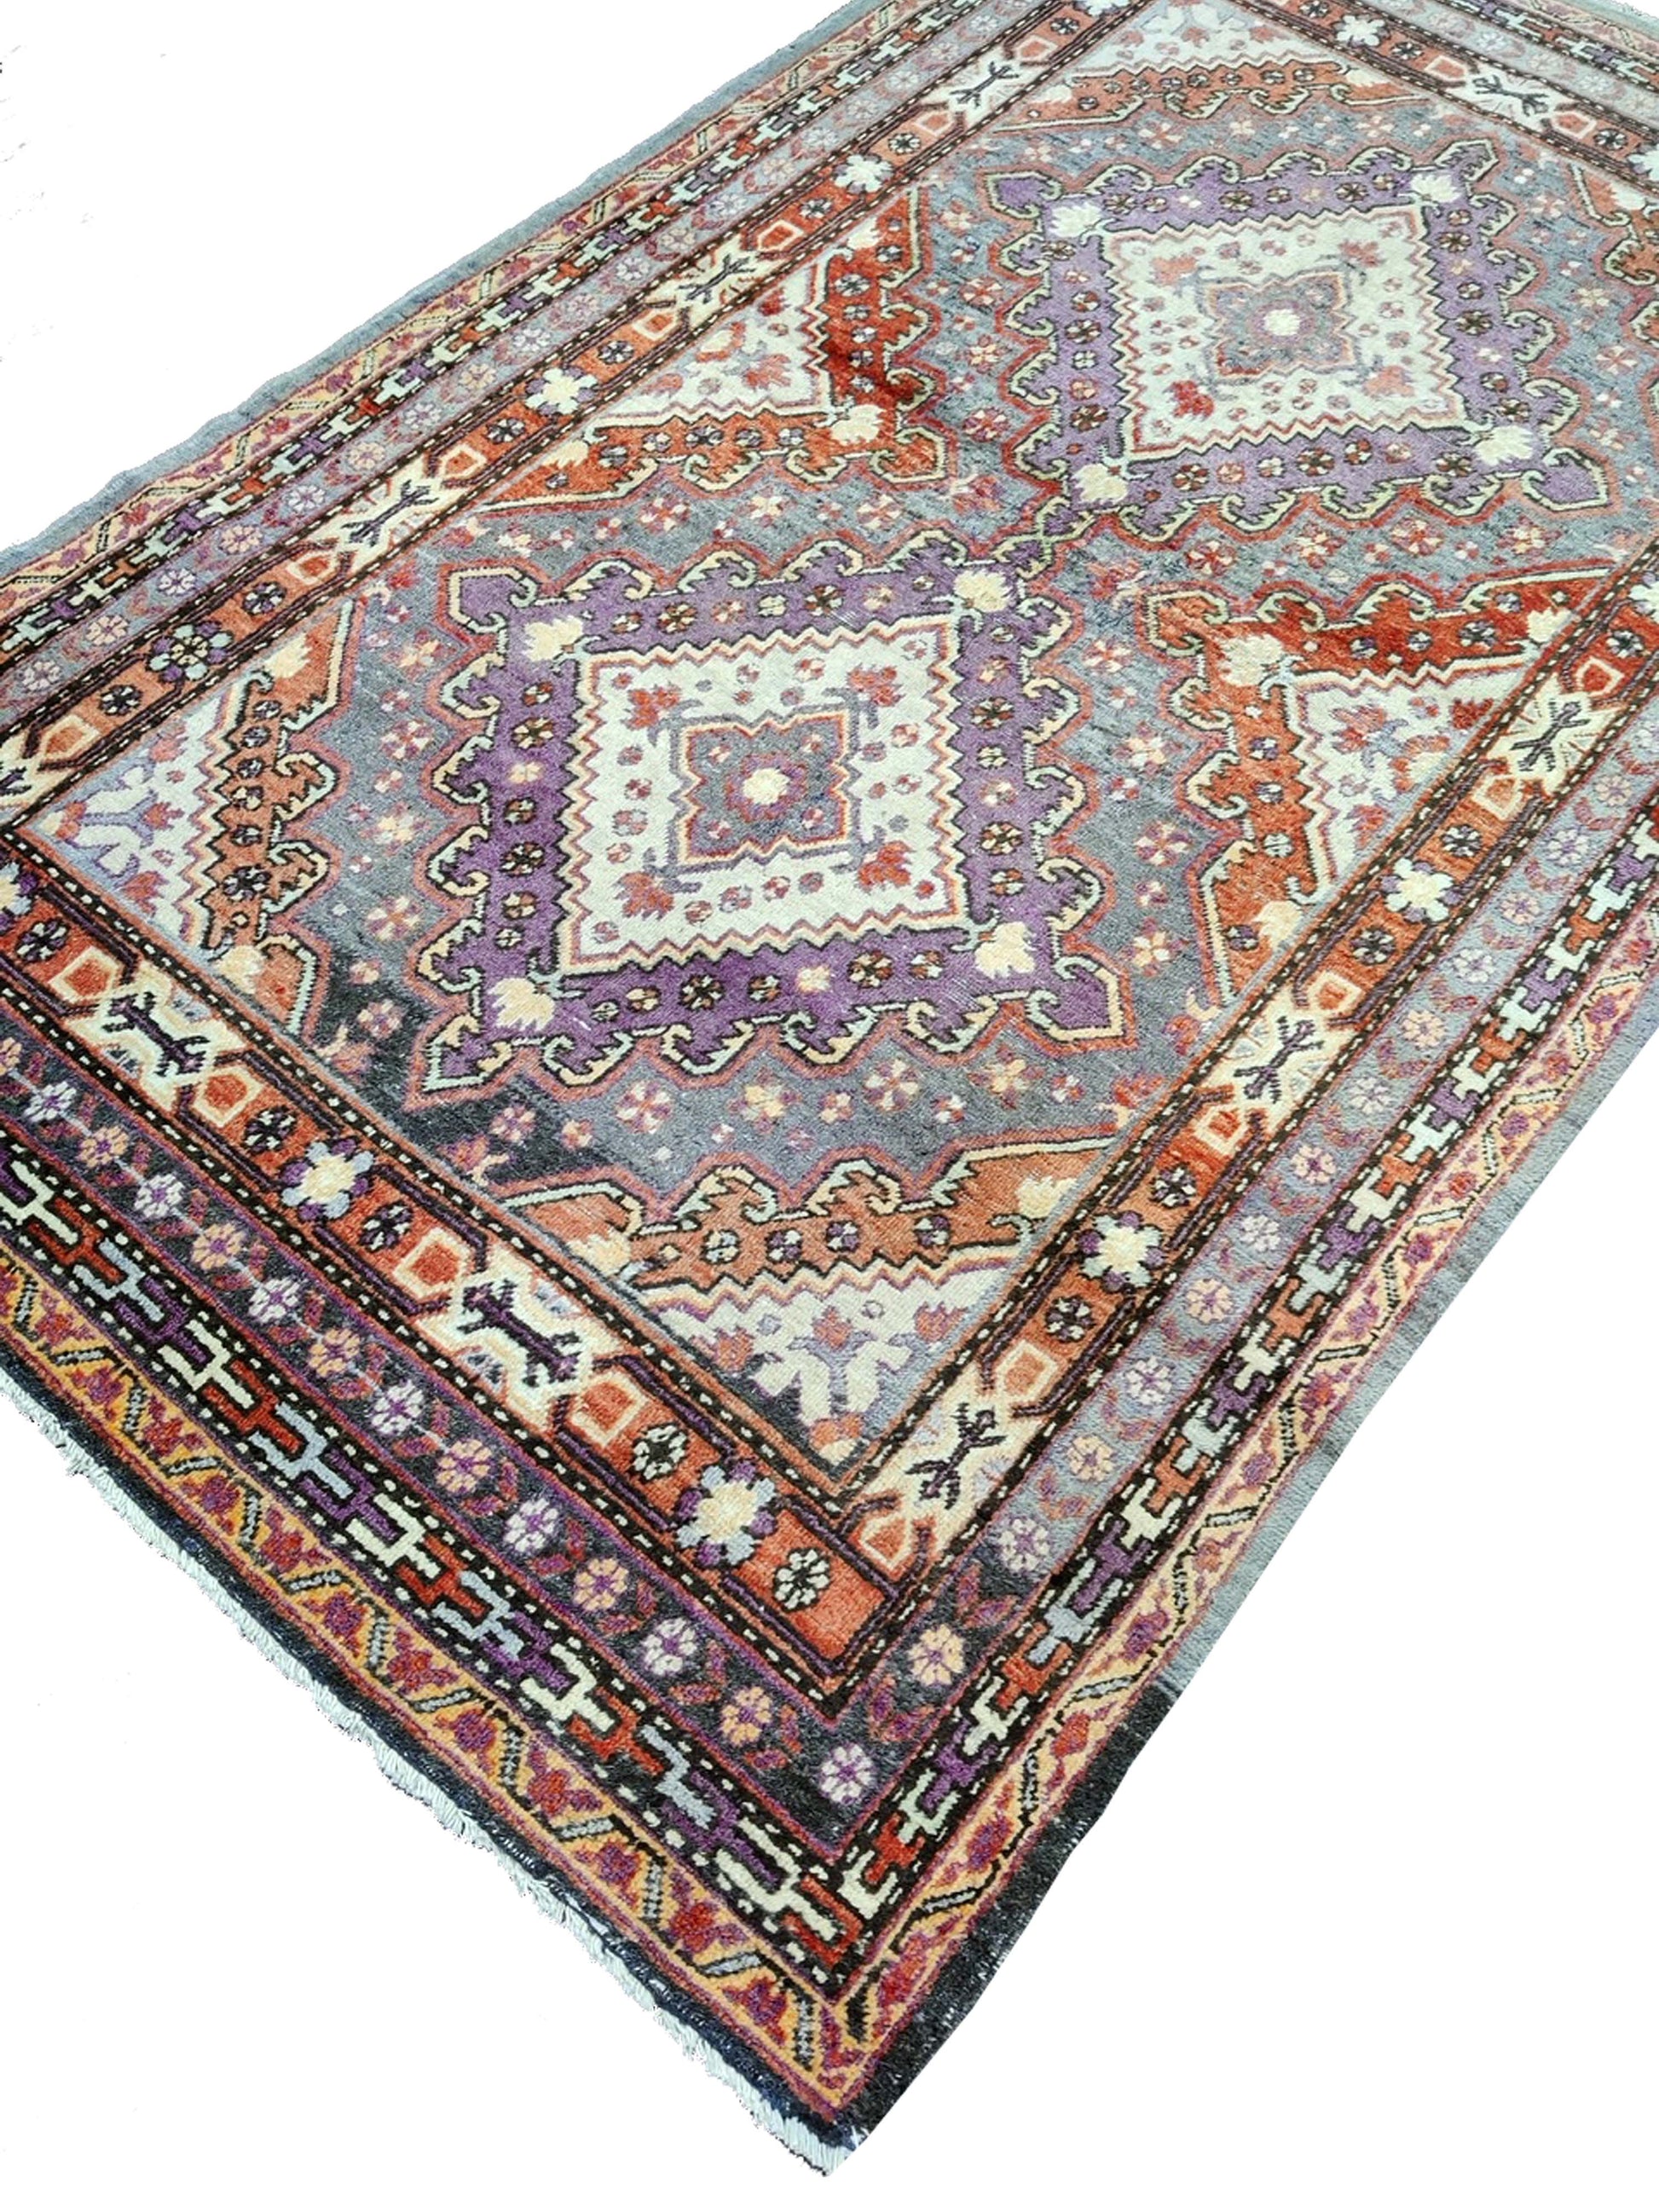 Get trendy with Rust Grey Antique Khotan Handknotted Rug 5.6x9.2ft 166x278cms - Tribal Rugs available at Jaipur Oriental Rugs. Grab yours for $5045.00 today!